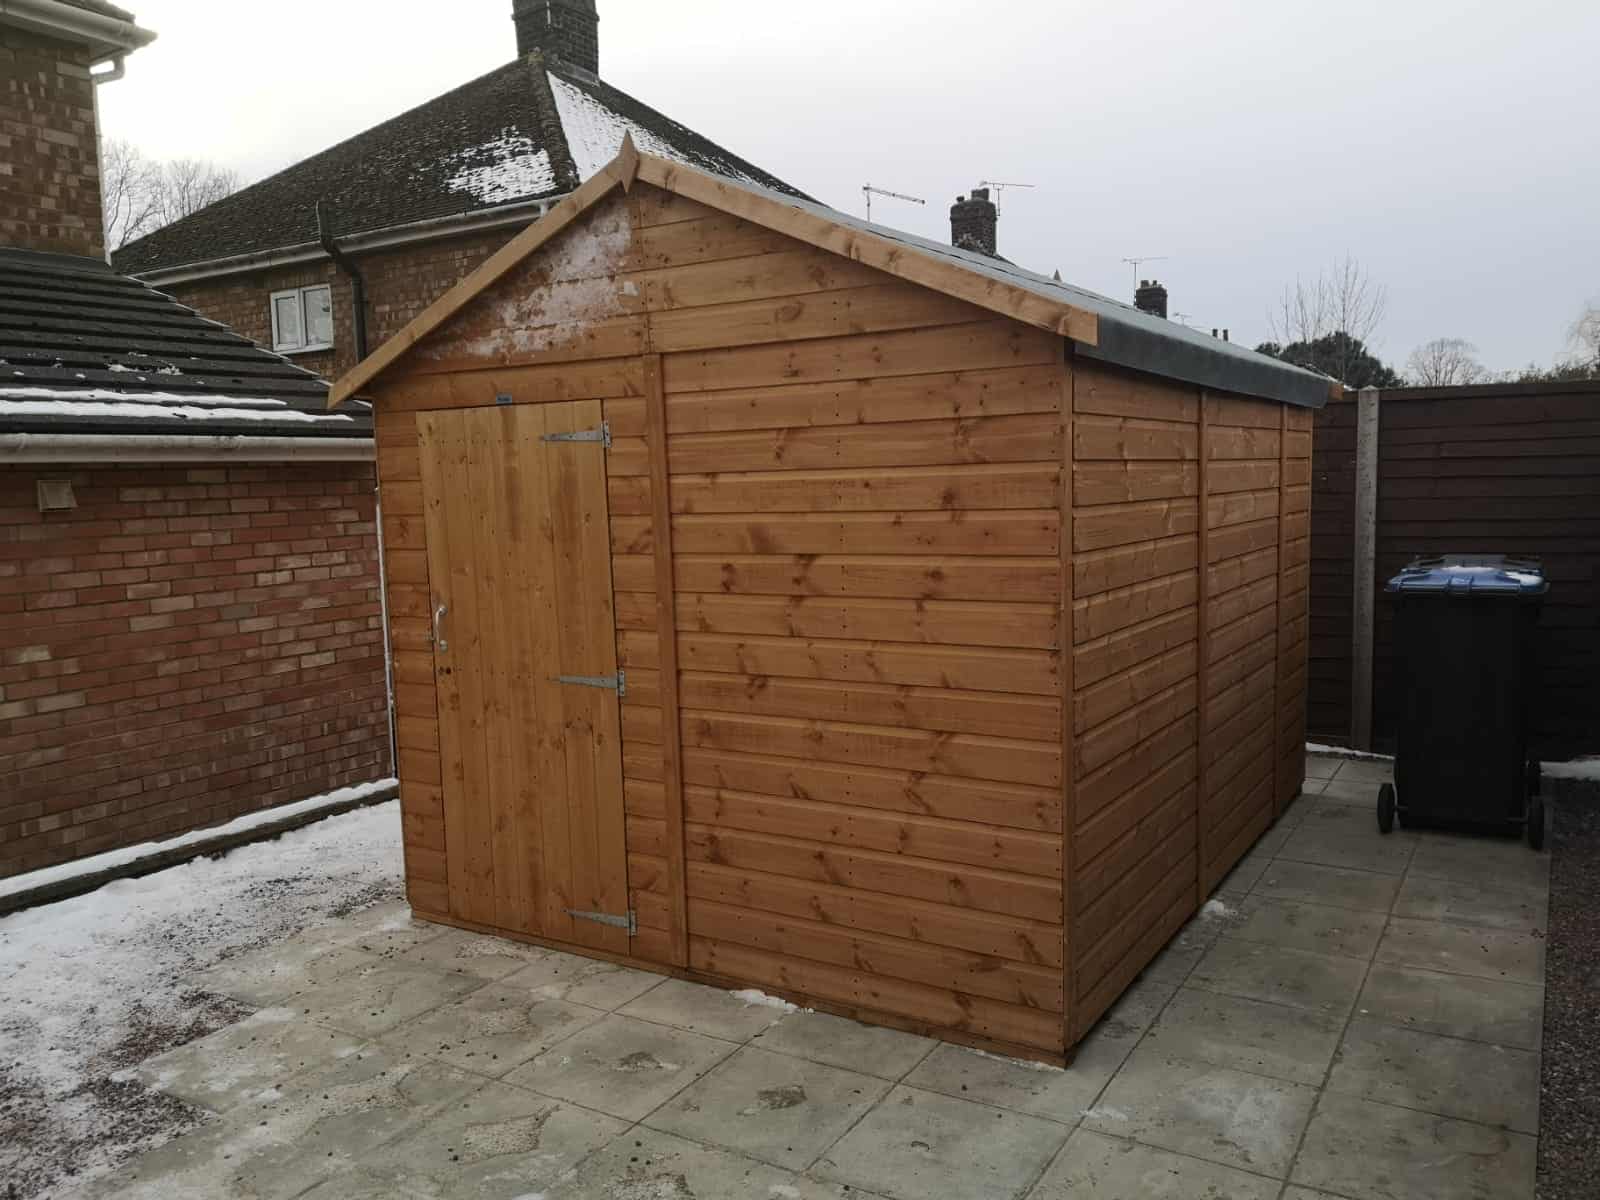 New Shed & Patio